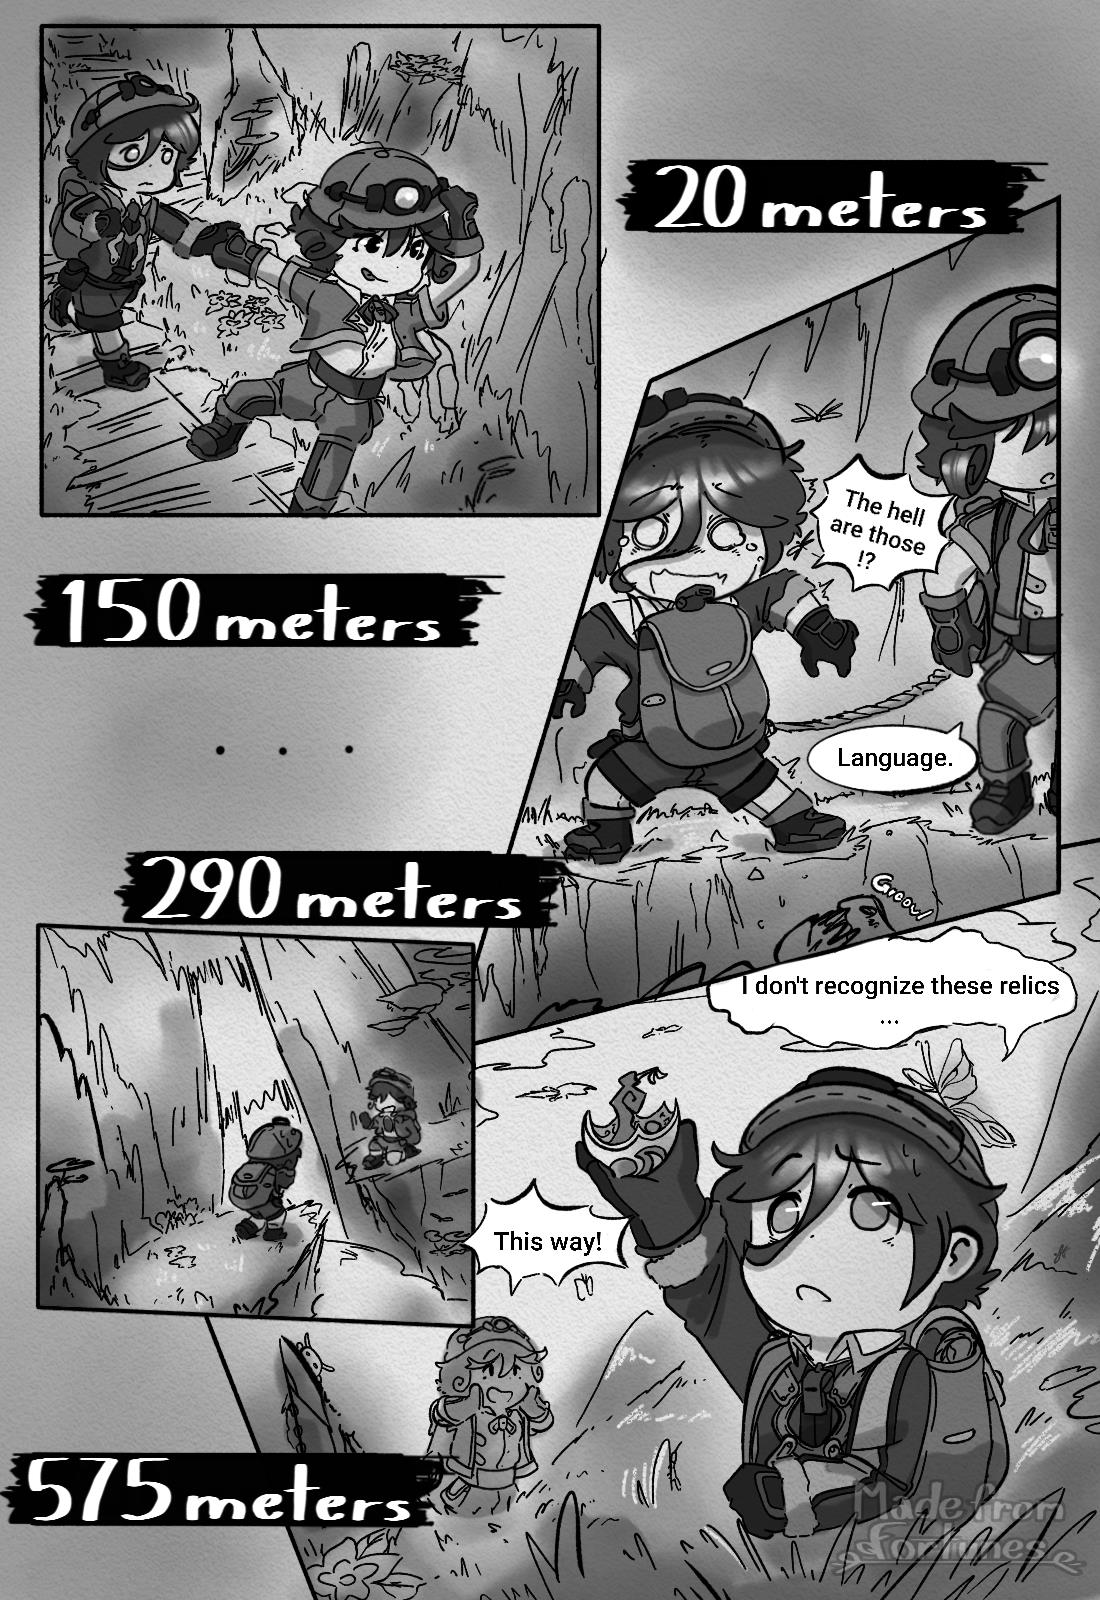 Made From Fortunes (Made In Abyss Fanmade Comic) - Page 3